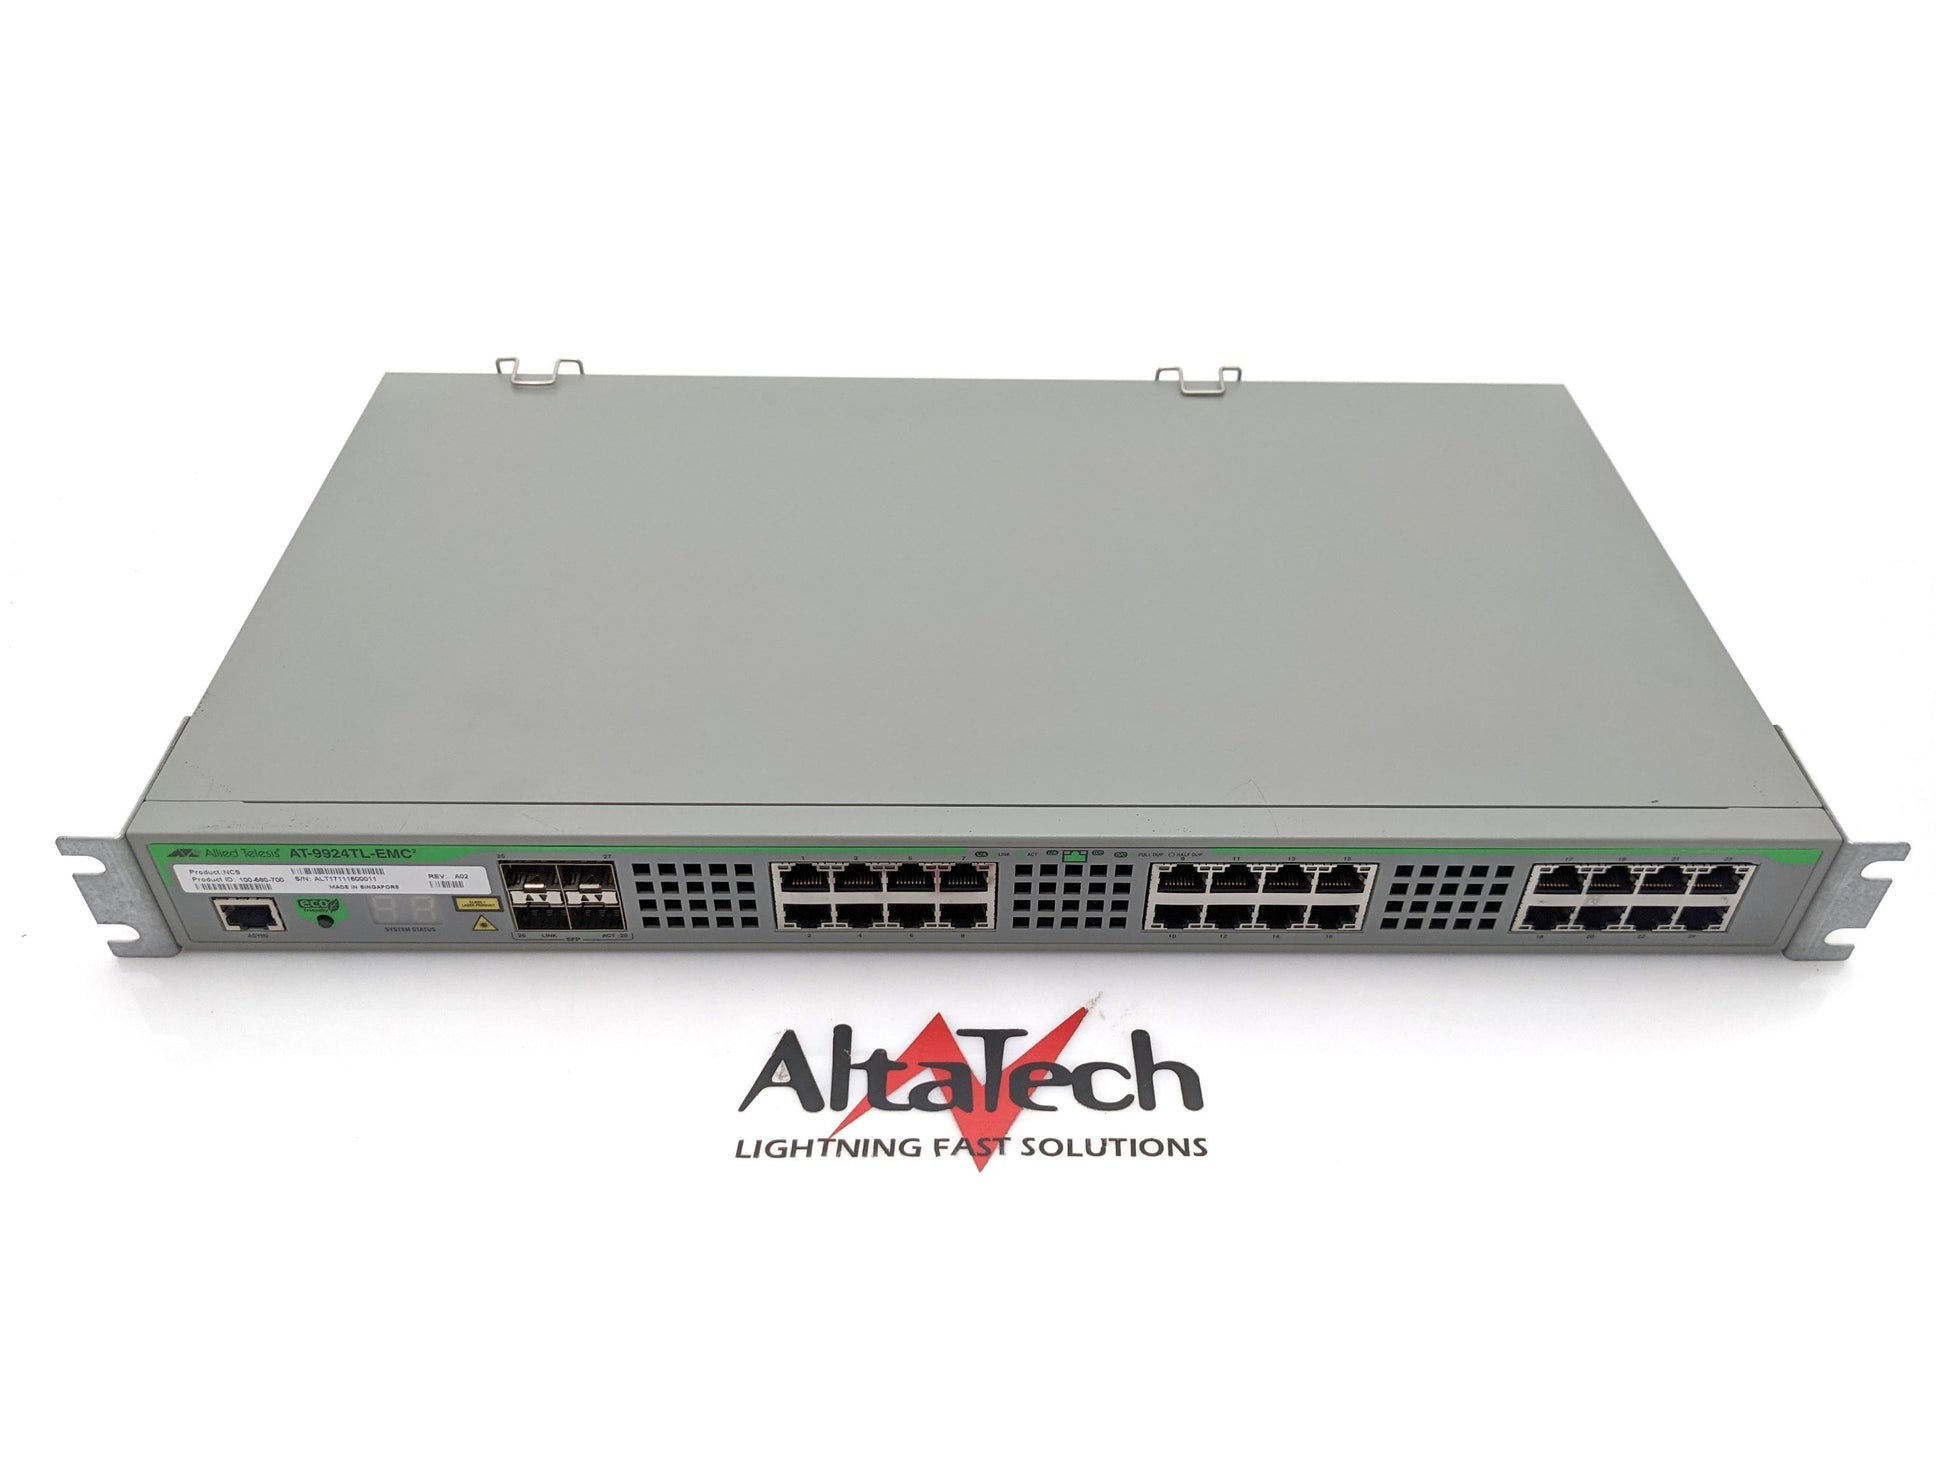 OEM AT-9924TL-EMC Allied Telesis 24-Port Ethernet Switch for EMC (100-580-700), w/ 4x SFP, Used